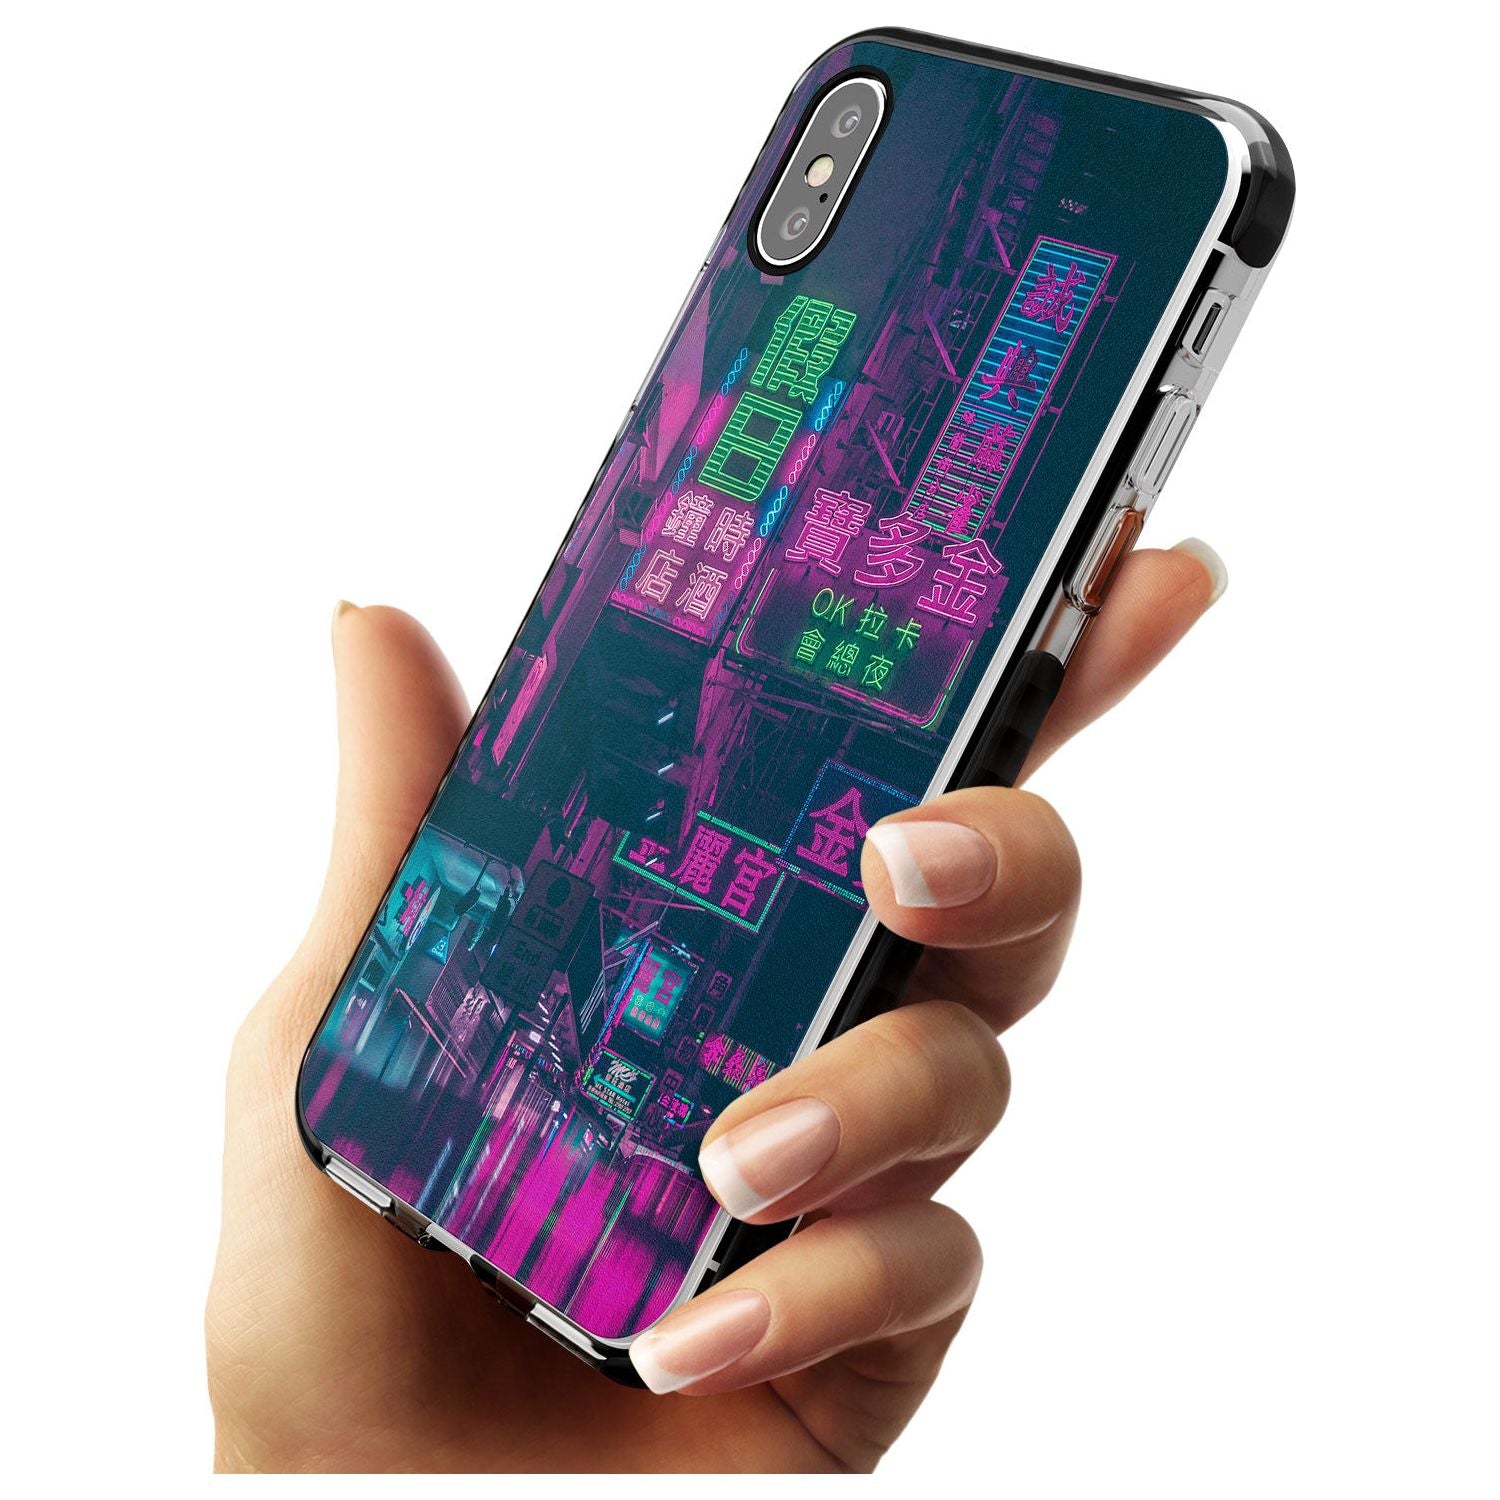 Rainy Reflections - Neon Cities Photographs Black Impact Phone Case for iPhone X XS Max XR